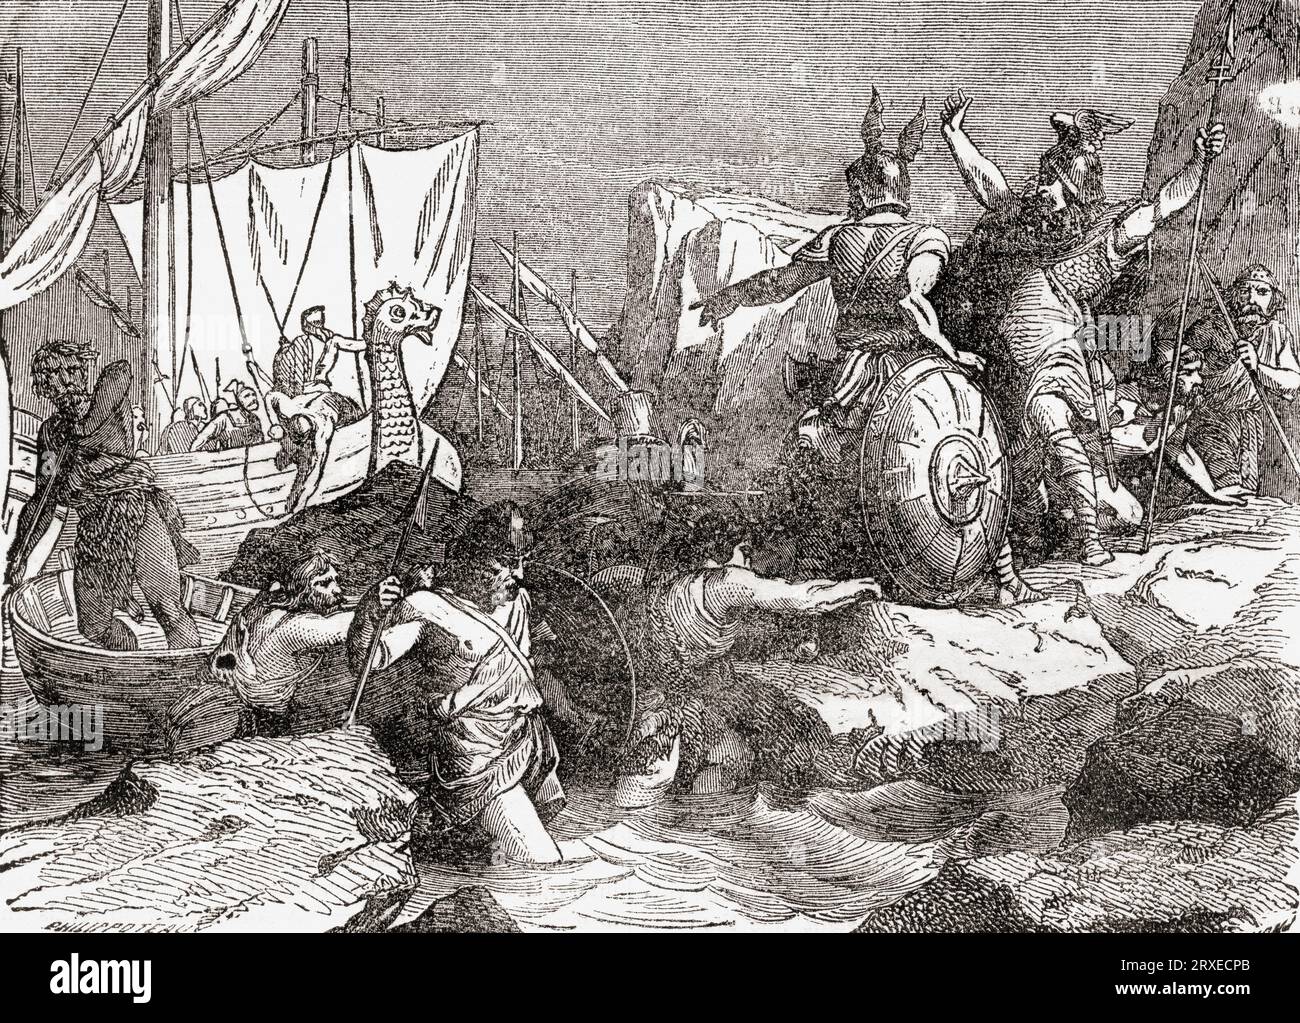 The piratical invasion of the Saxons under Hengist and Horsa, Germanic brothers who led the Angles, Saxons and Jutes in their invasion of Britain in the 5th century.  From Cassell's Illustrated History of England, published 1857. Stock Photo